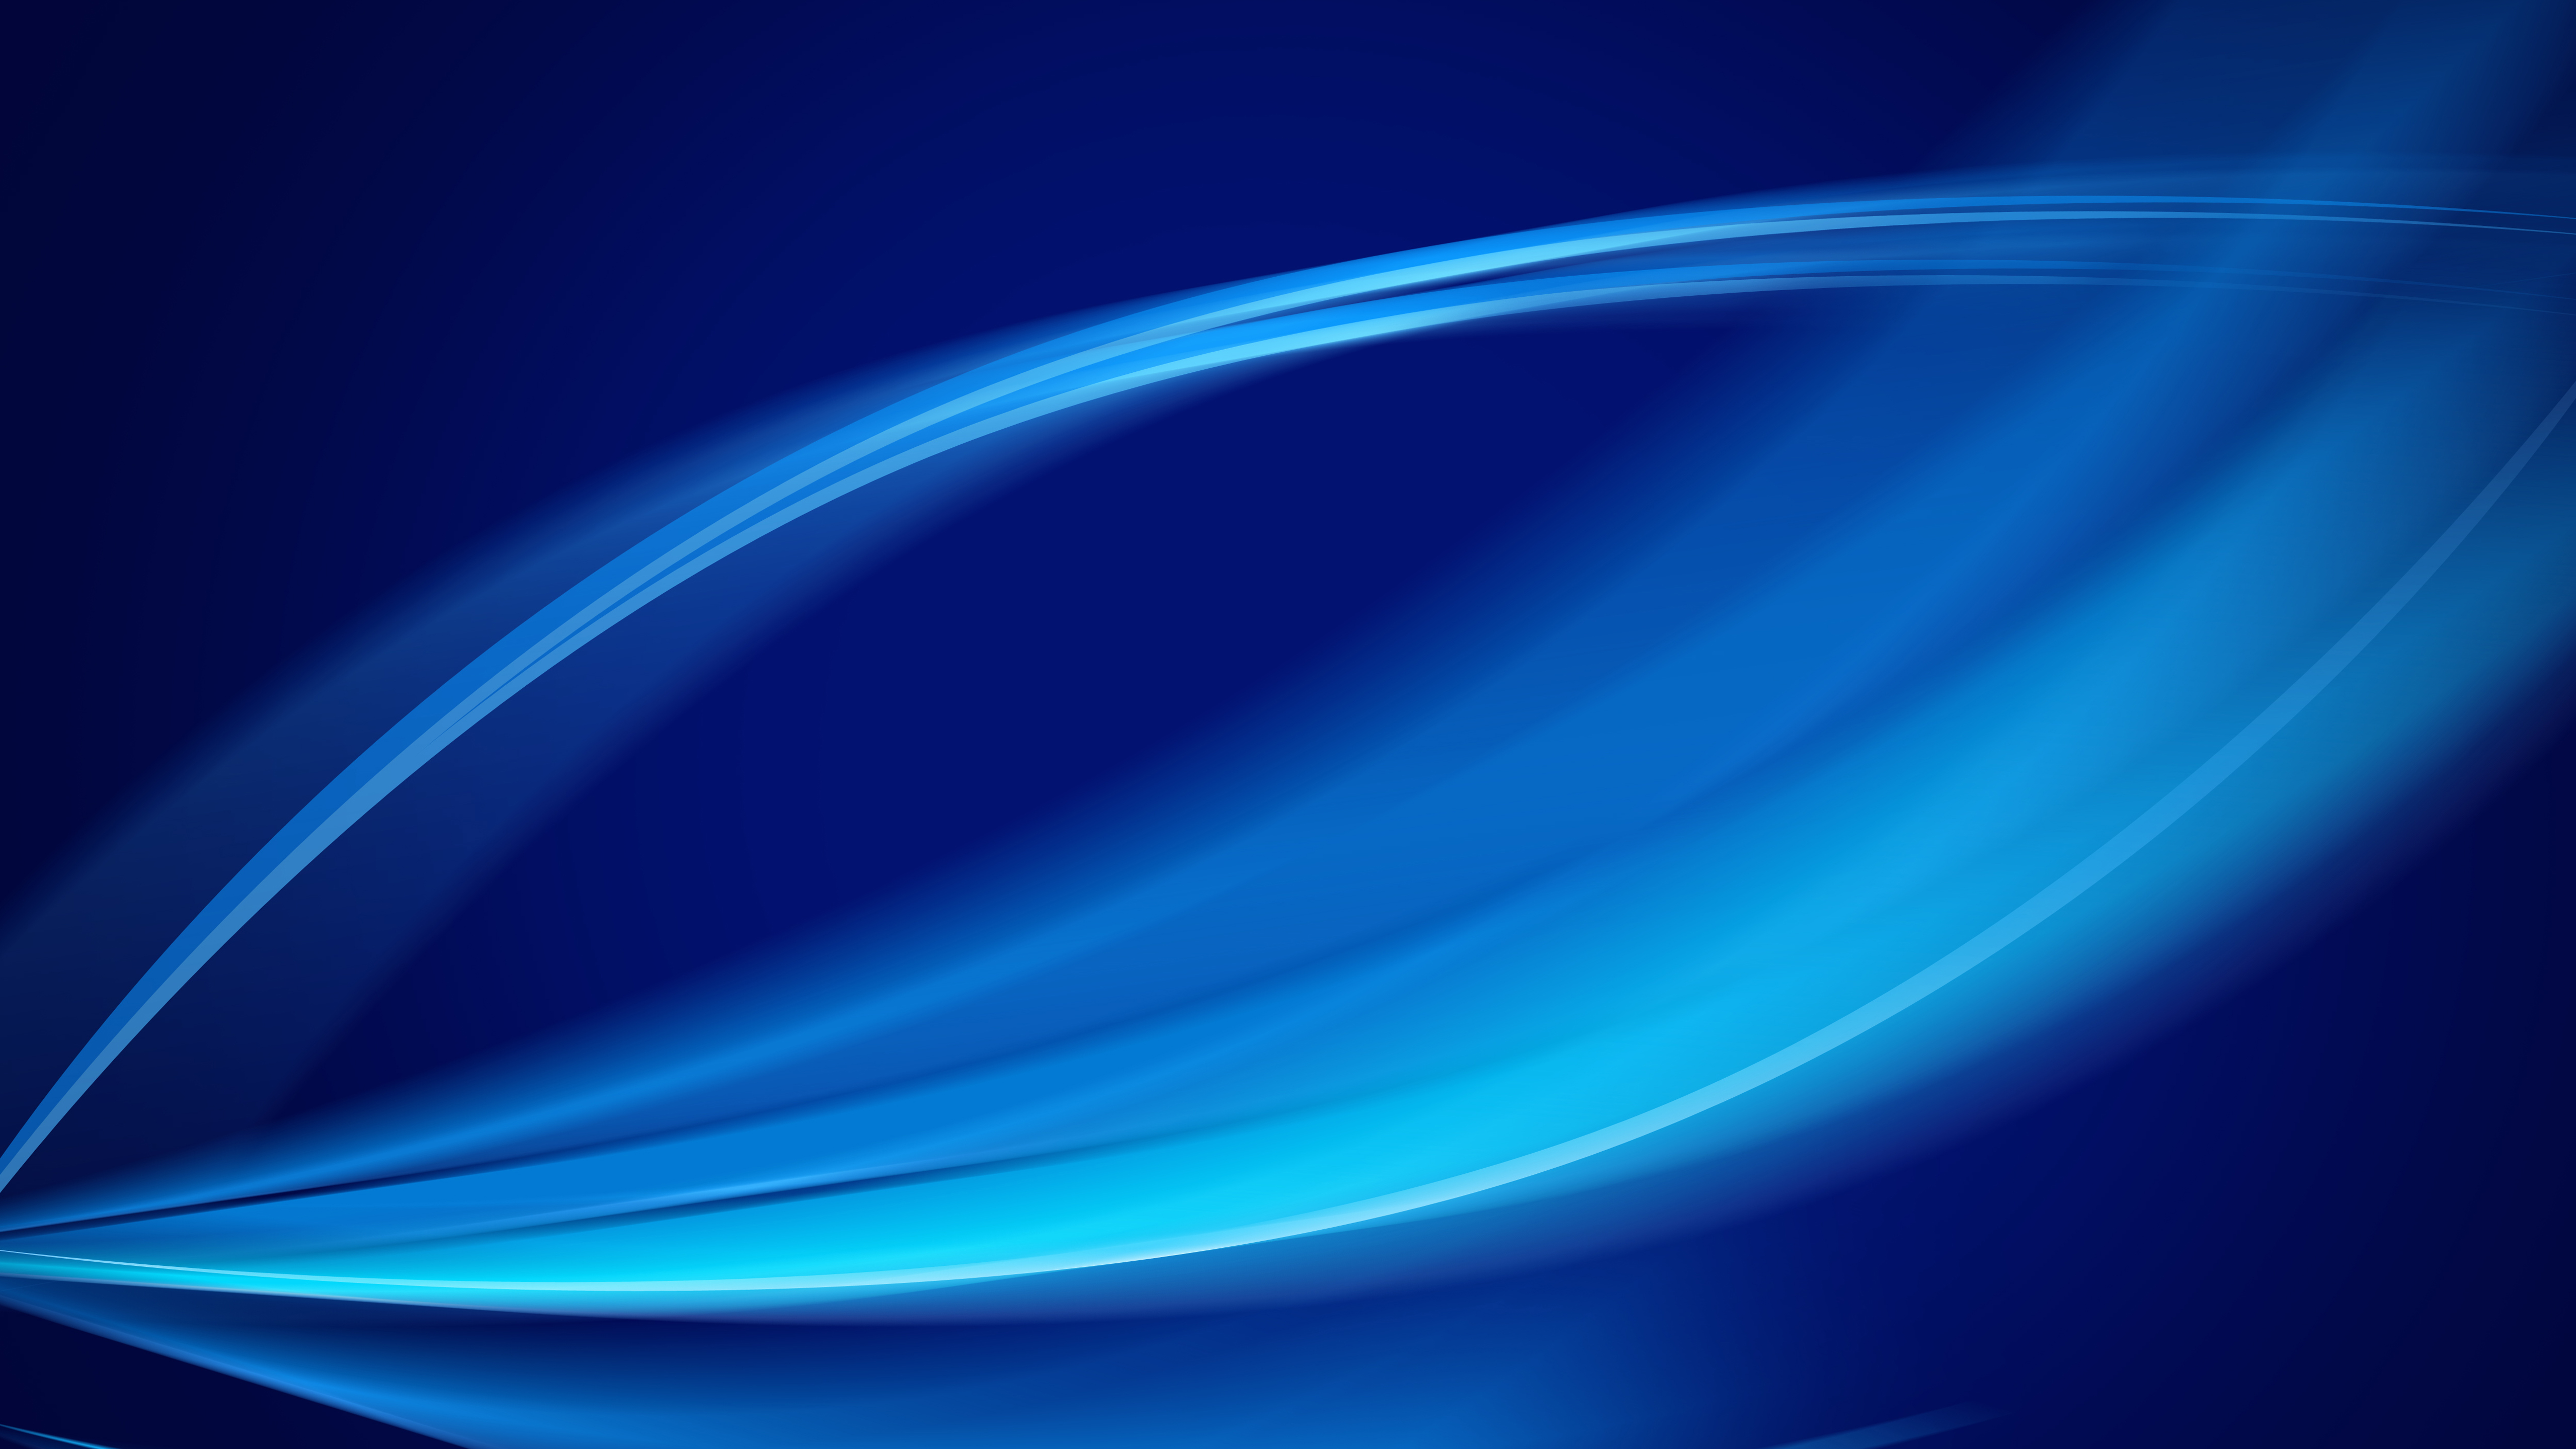 Abstract 3D Abstract Blue Wavy Lines 5120x2880